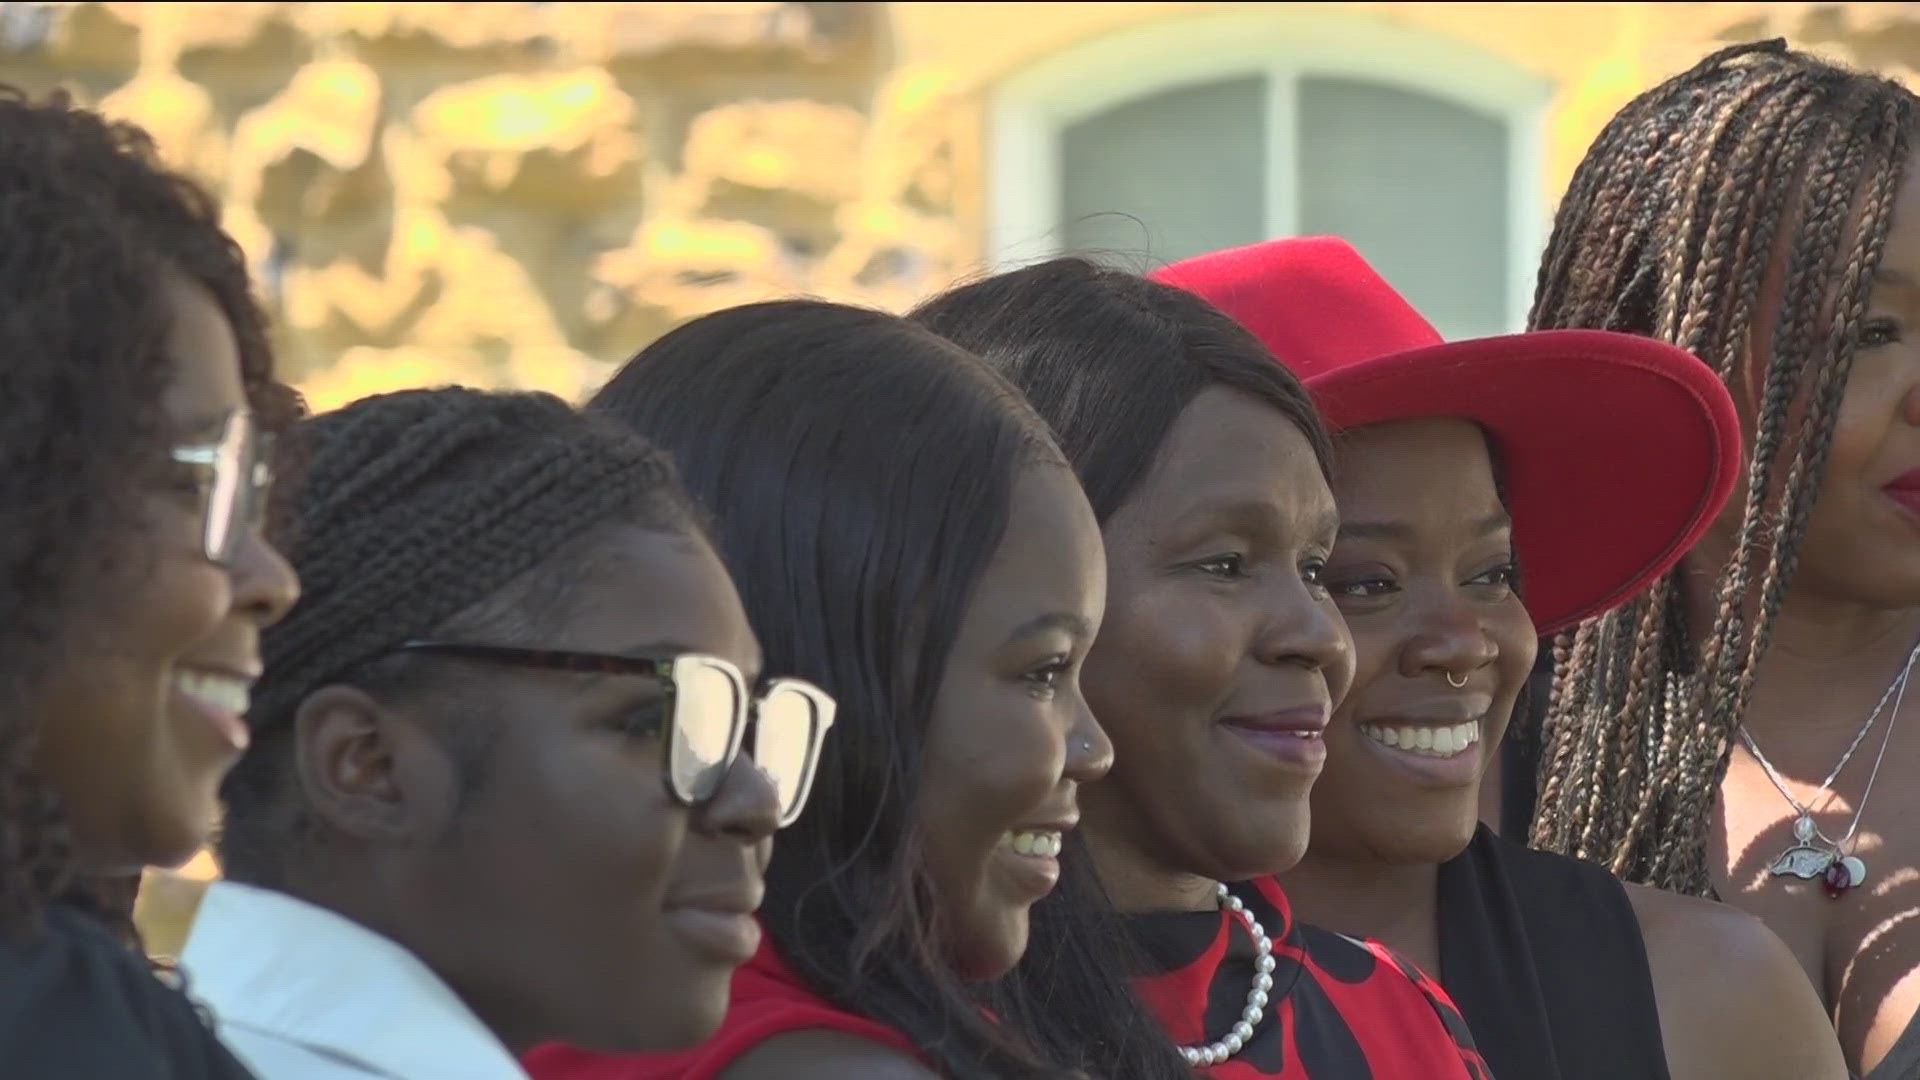 5NEWS REPORTER JACOB LUTHI CAUGHT UP WITH THE SANDIDGE FAMILY WHO SAY GRADUATING FROM THE UNIVERSITY OF ARKANSAS IS A TRADITION...